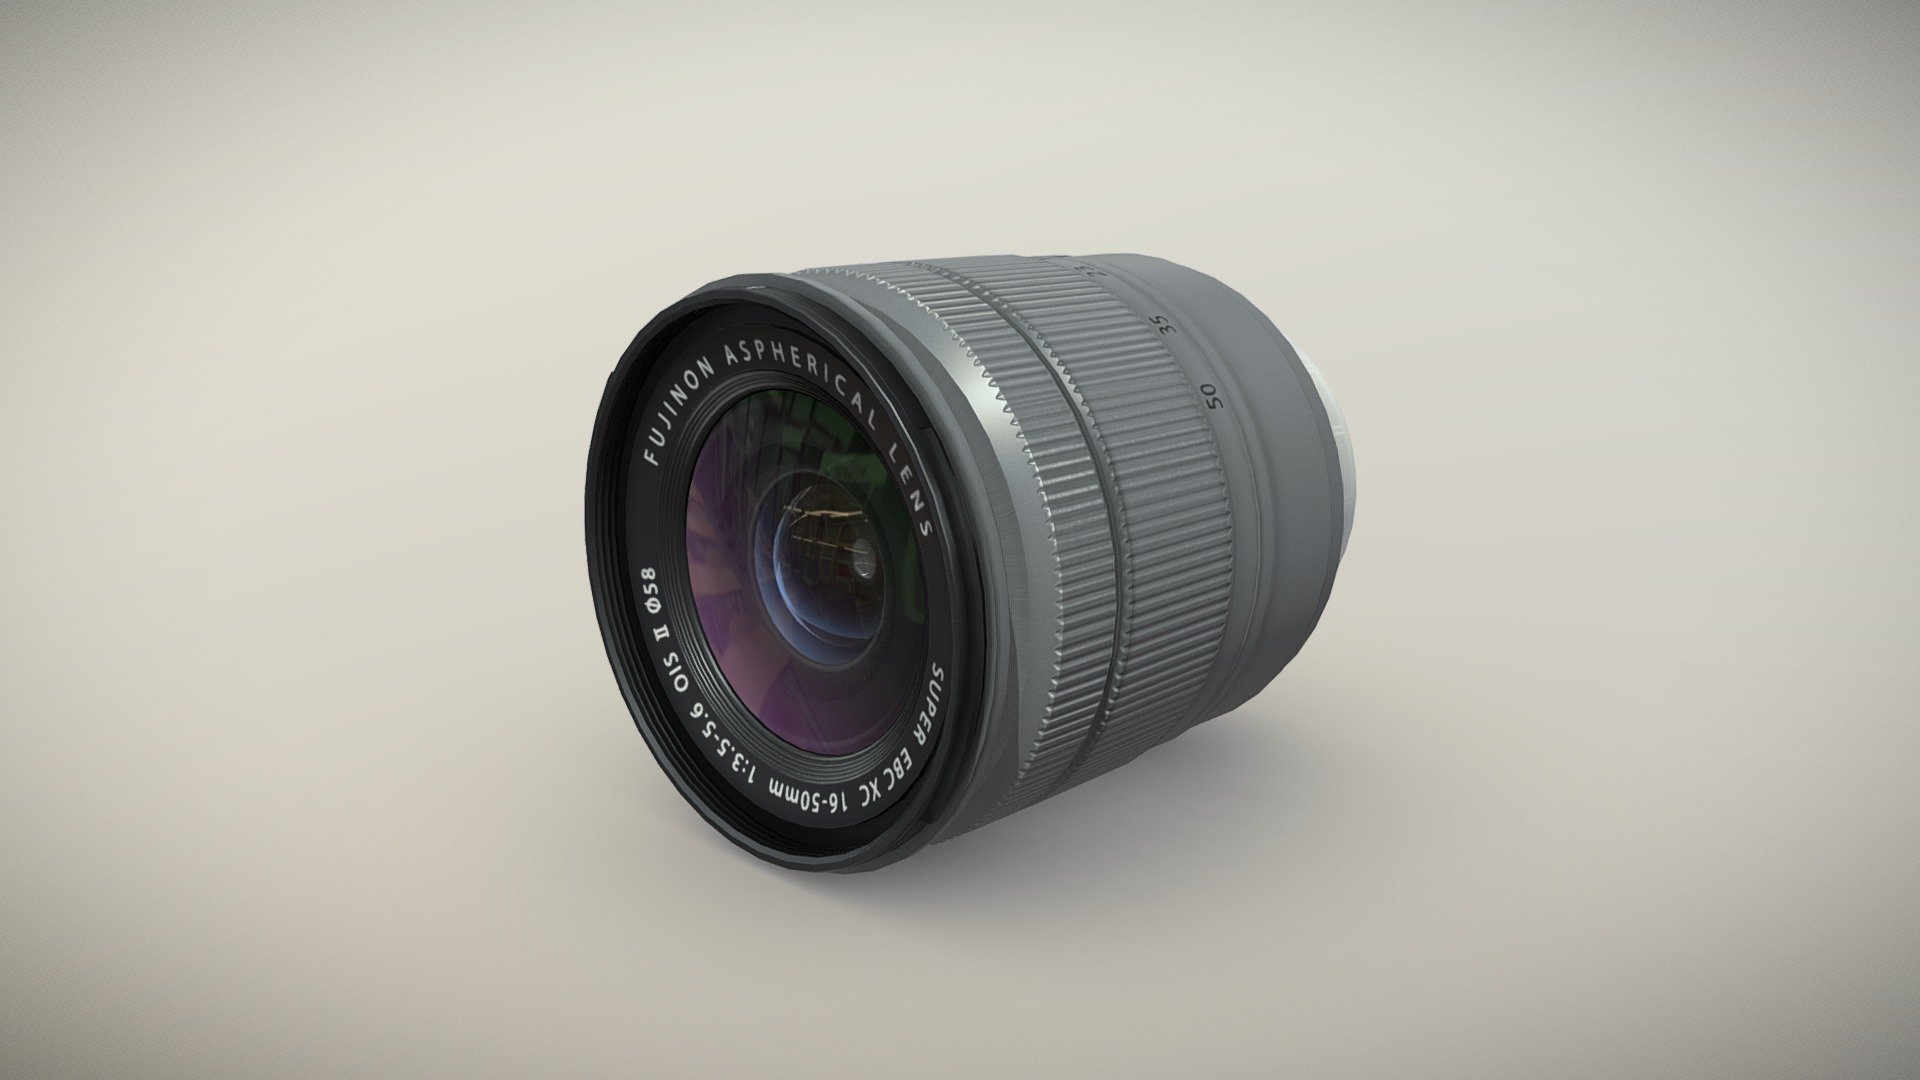 •   Let me present to you high-quality low-poly 3D model Fujifilm Fujinon XC16-50mm f/3.5-5.6 OIS II Lens. Modeling was made with ortho-photos of real lens that is why all details of design are recreated most authentically.

•    This model consists of two meshes, it is low-polygonal and it has three materials (Lens body and Glass of Lens).

•   The total of the main textures is 4. Resolution of all textures is 4096 pixels square aspect ratio in .png format. Also there is original texture file .PSD format in separate archive.

•   Polygon count of the model is – 3712.

•   The model has correct dimensions in real-world scale. All parts grouped and named correctly.

•   To use the model in other 3D programs there are scenes saved in formats .fbx, .obj, .DAE, .max (2010 version).

Note: If you see some artifacts on the textures, it means compression works in the Viewer. We recommend setting HD quality for textures. But anyway, original textures have no artifacts 3d model